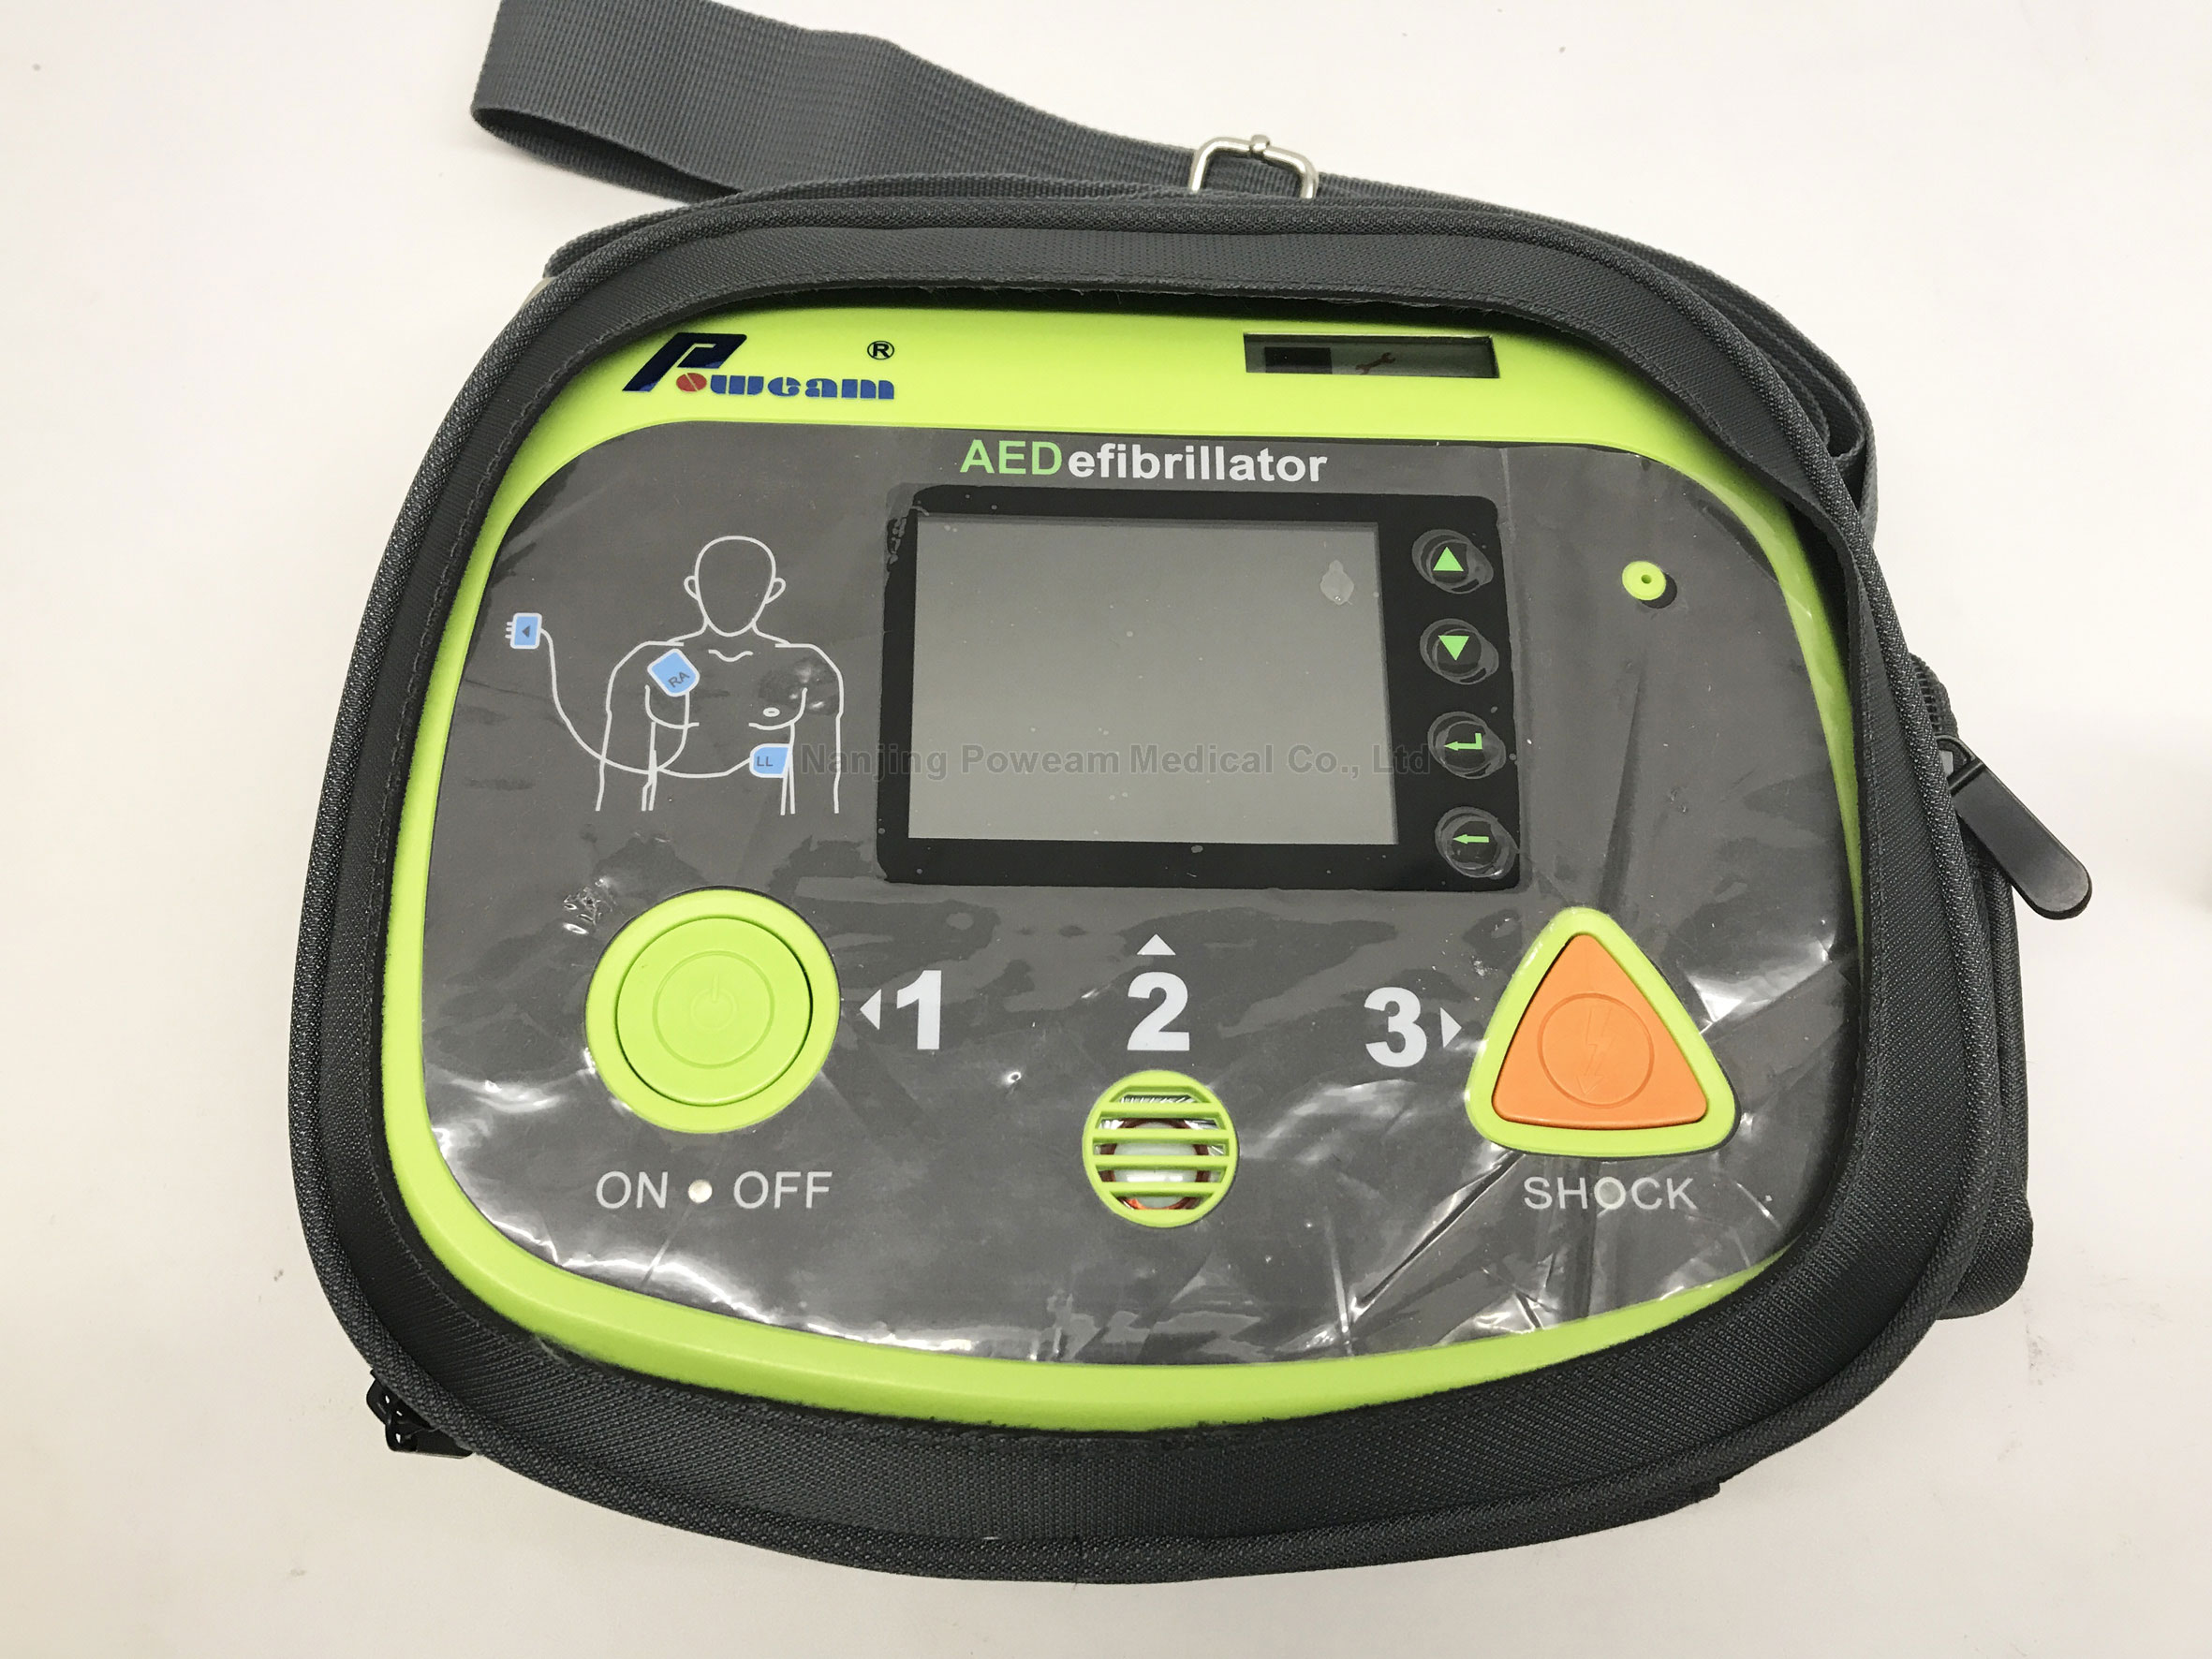 Aed Defibrillator Aed7000 Plus with Color LCD Screen